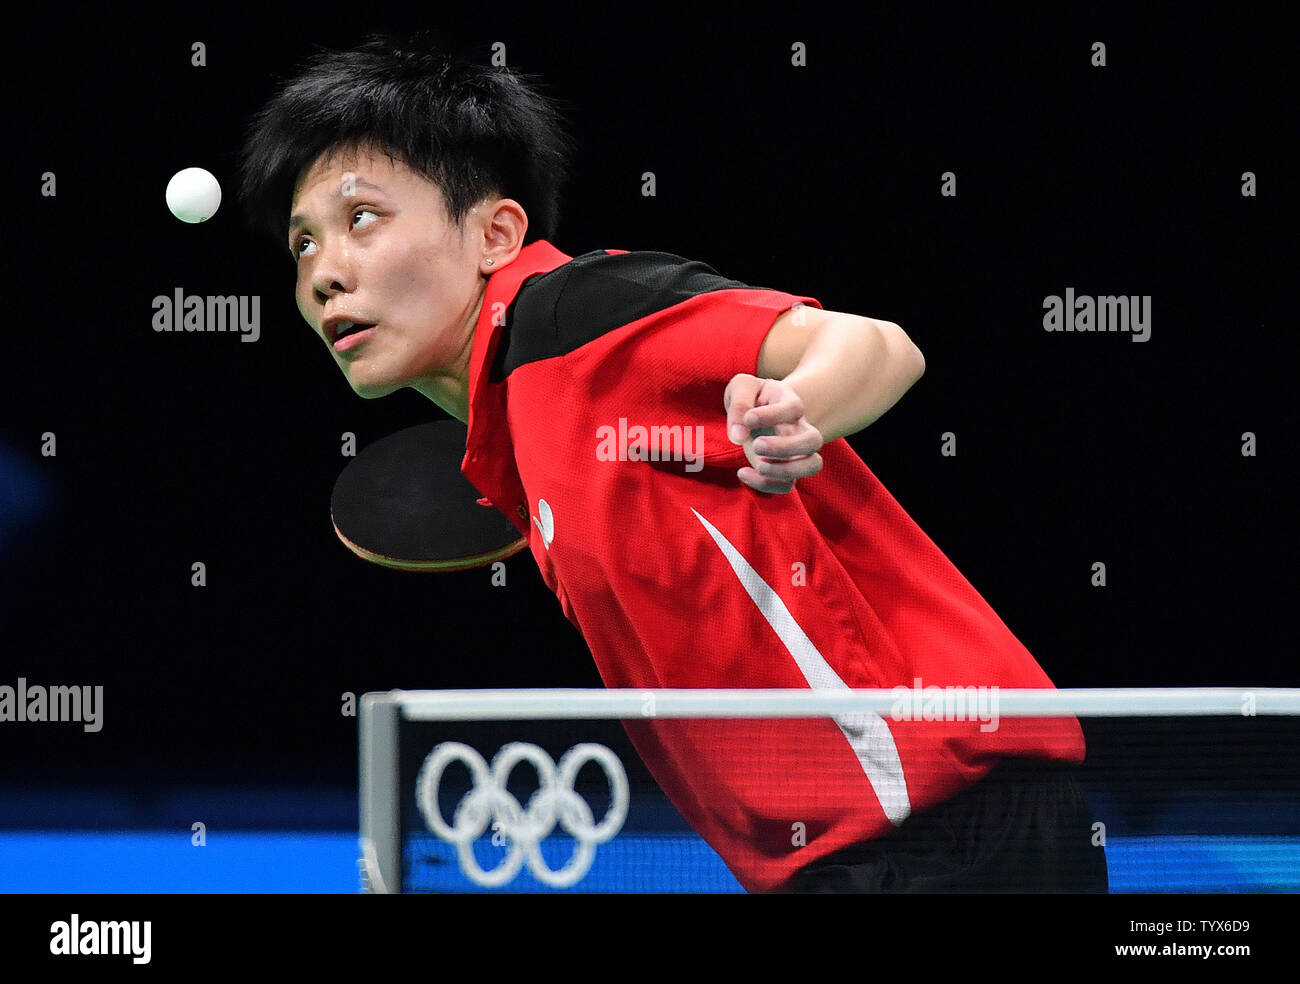 Chinese Taipei's Cheng I-Ching serves the ball in her table tennis match against South Korea's Hyowon Suh at the 2016 Rio Summer Olympics in Rio de Janeiro, Brazil, August 8, 2016. Photo by Kevin Dietsch/UPI Stock Photo